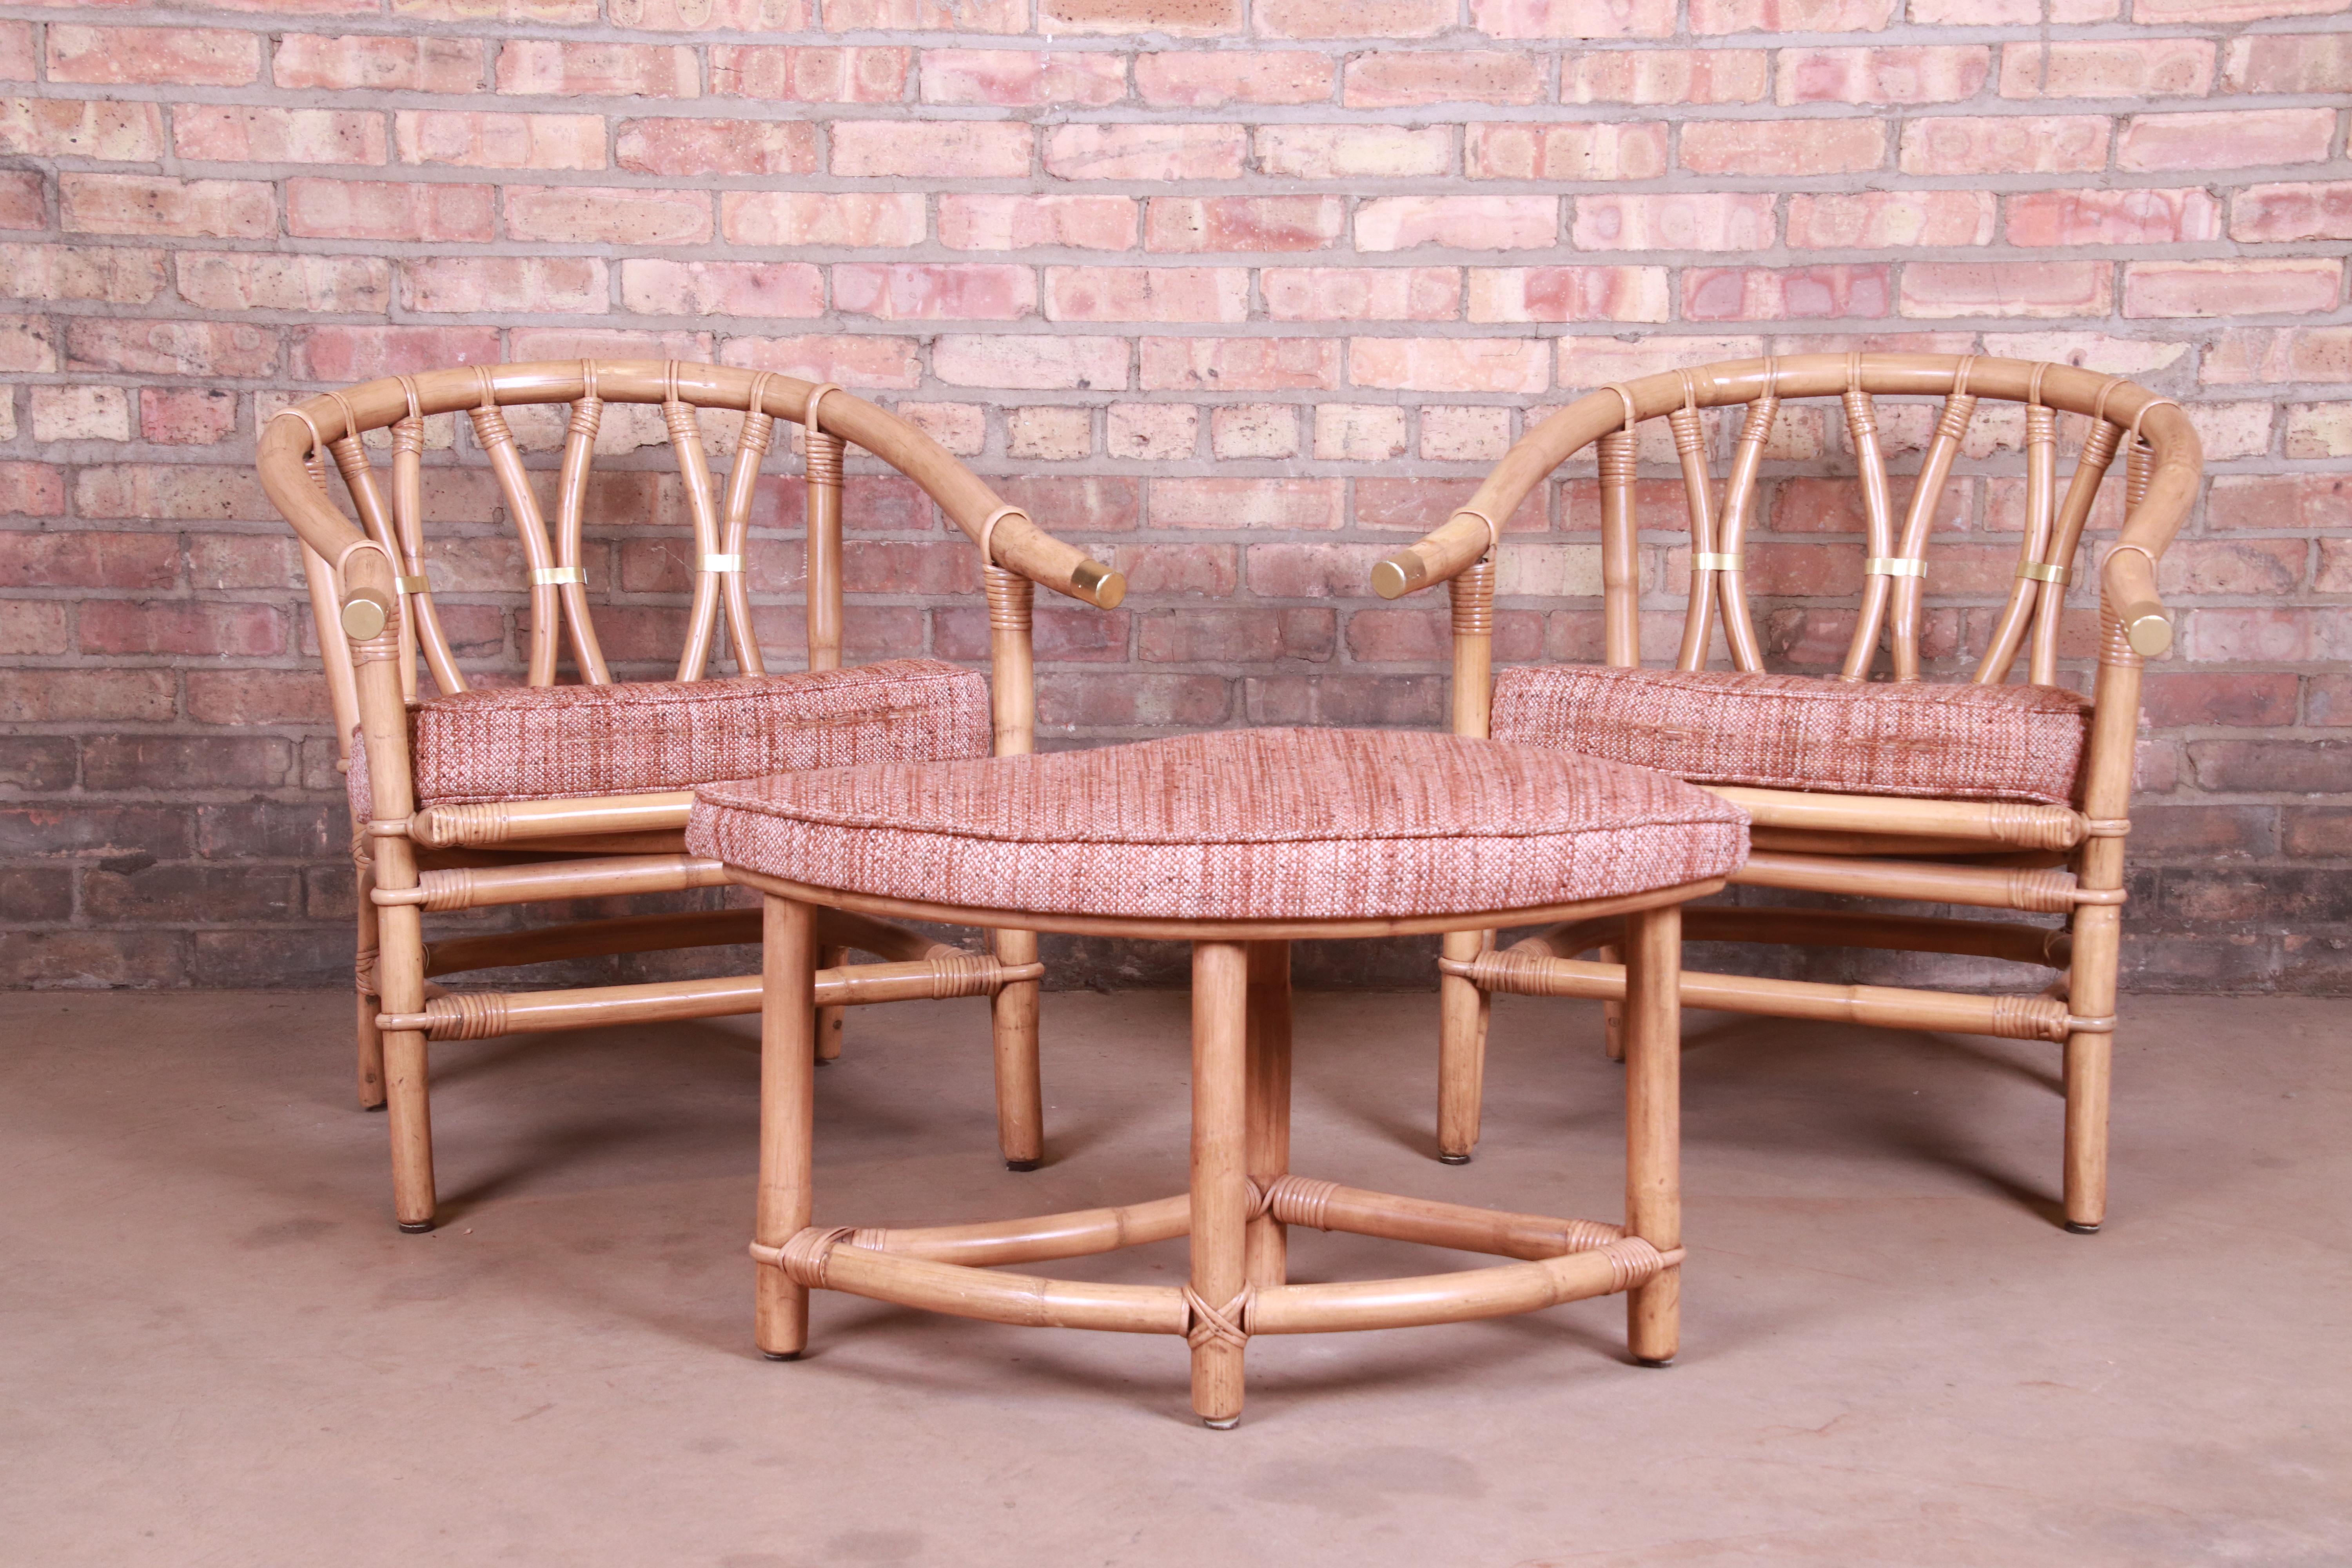 A gorgeous pair of midcentury organic modern Hollywood Regency lounge chairs with ottoman

In the manner of McGuire

USA, circa 1960s

Bamboo and rattan, with brass accents and upholstered seats.

Measures: 25.88